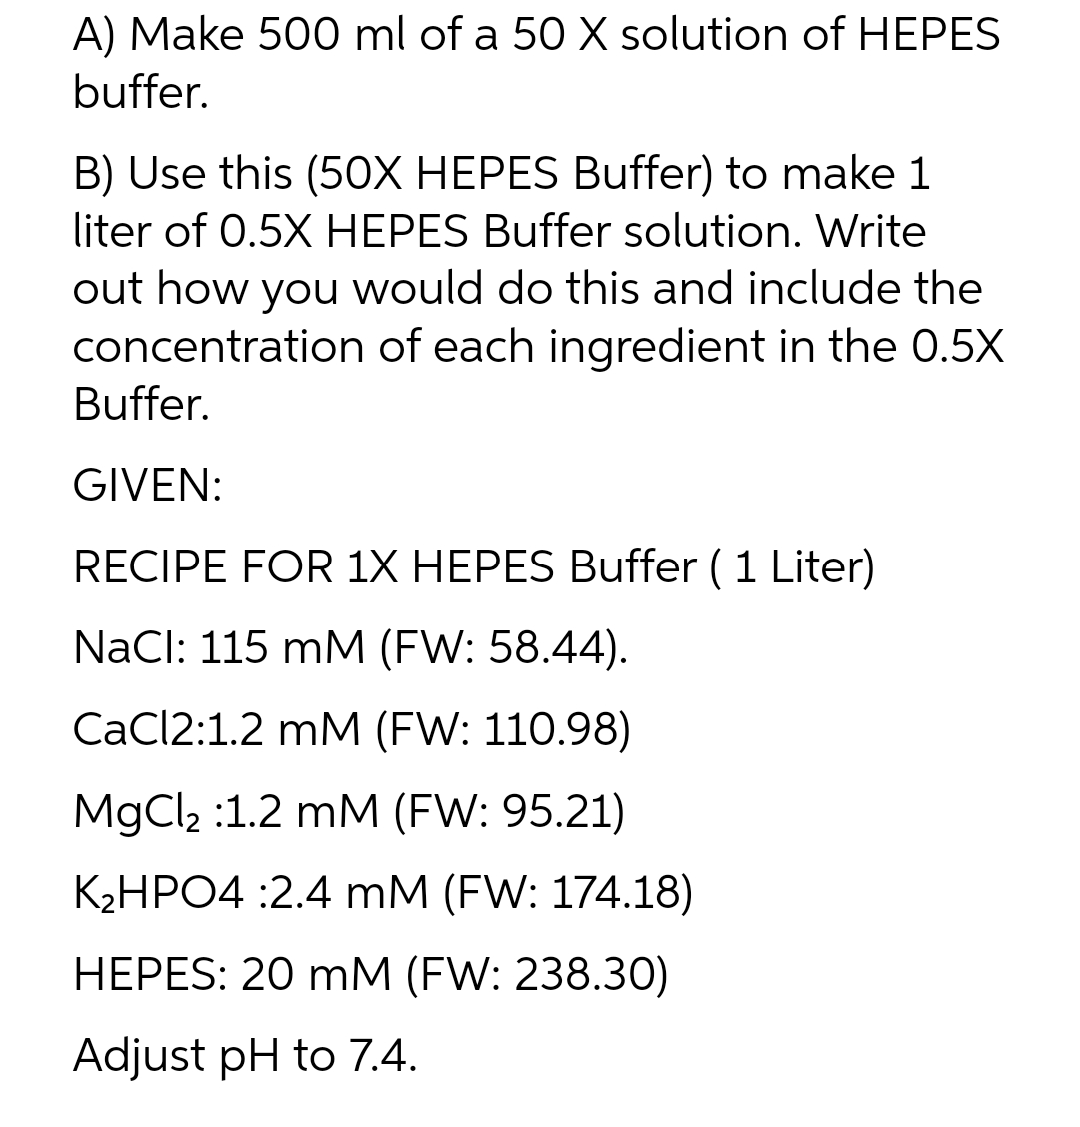 A) Make 500 ml of a 50 X solution of HEPES
buffer.
B) Use this (50X HEPES Buffer) to make 1
liter of 0.5X HEPES Buffer solution. Write
out how you would do this and include the
concentration of each ingredient in the 0.5X
Buffer.
GIVEN:
RECIPE FOR 1X HEPES Buffer ( 1 Liter)
NaCl: 115 mM (FW: 58.44).
CaCl2:1.2 mM (FW: 110.98)
MgCl₂ :1.2 mM (FW: 95.21)
K₂HPO4 :2.4 mM (FW: 174.18)
HEPES: 20 mM (FW: 238.30)
Adjust pH to 7.4.